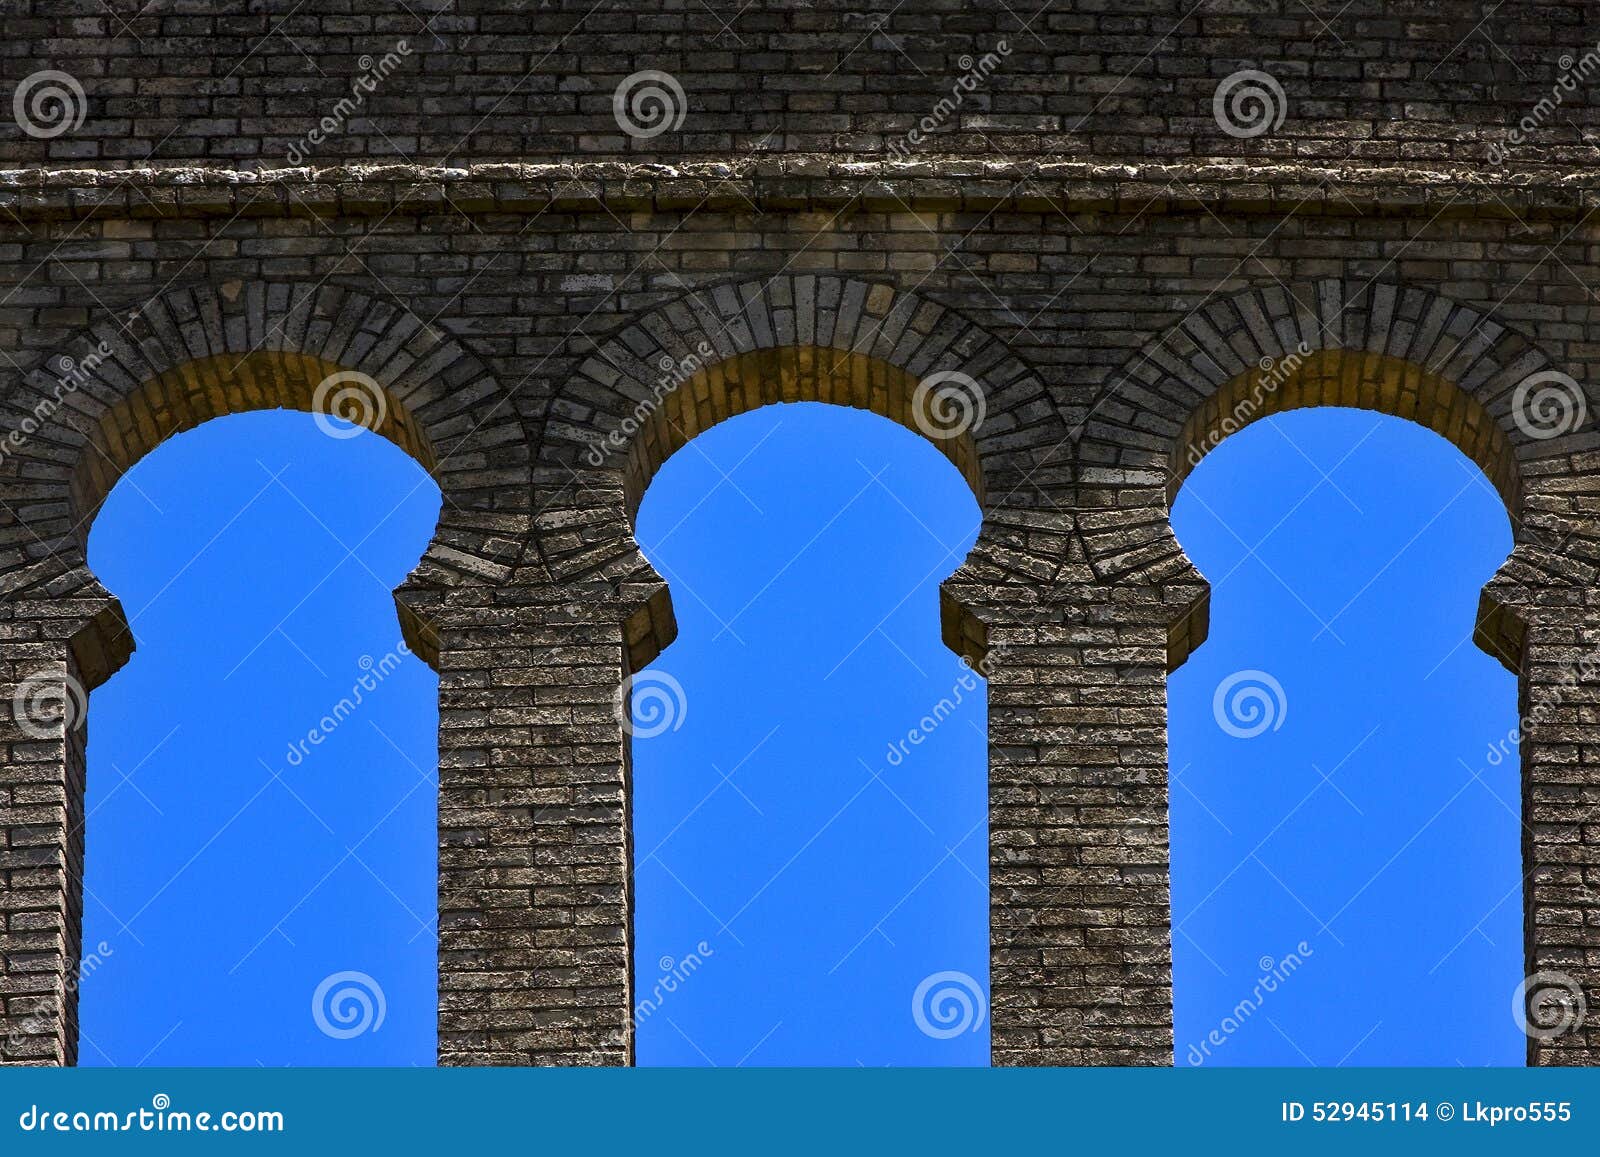 old window and wall in plaza de toros